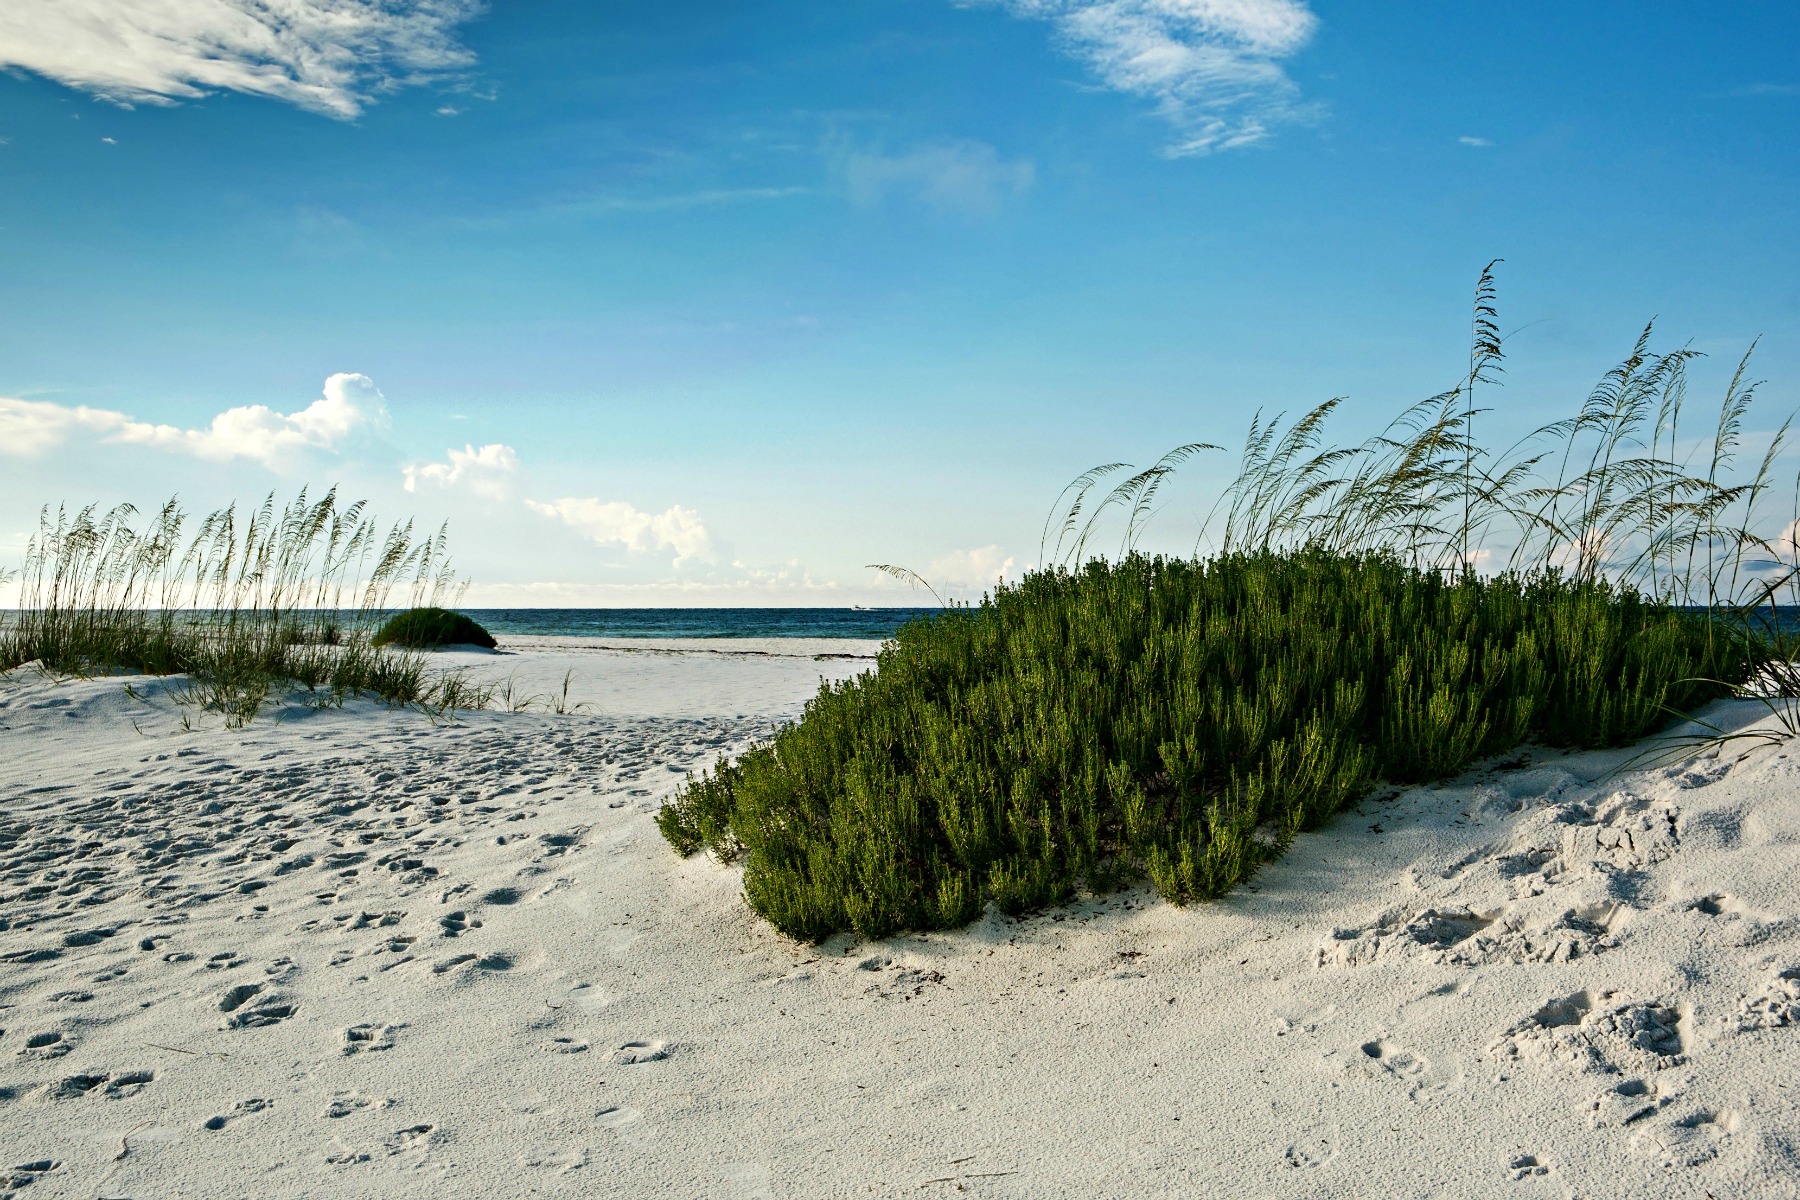 sand dunes, rosemary, and sea oats at the Gulf Coast in Northwest Florida